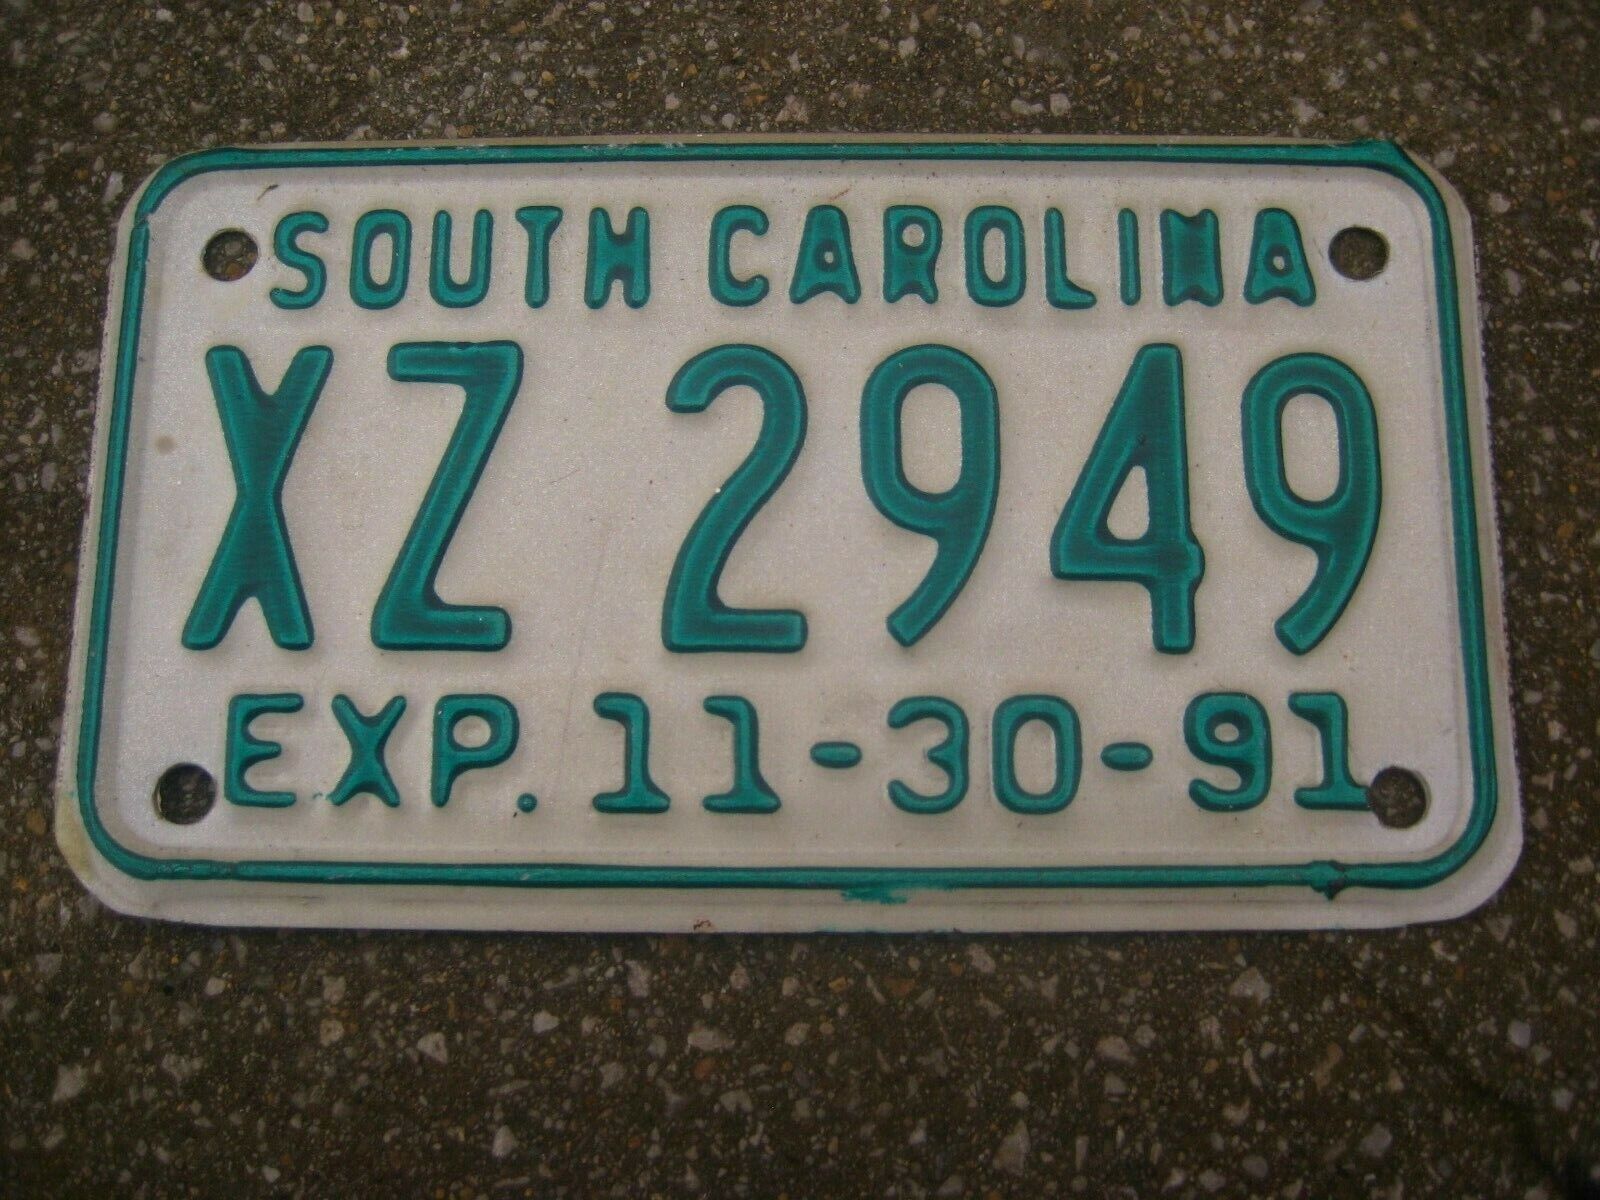 AMERICAN SOUTH CAROLINA 1991 VINTAGE MOTORCYCLE # XZ 2949 RARE NUMBER PLATE